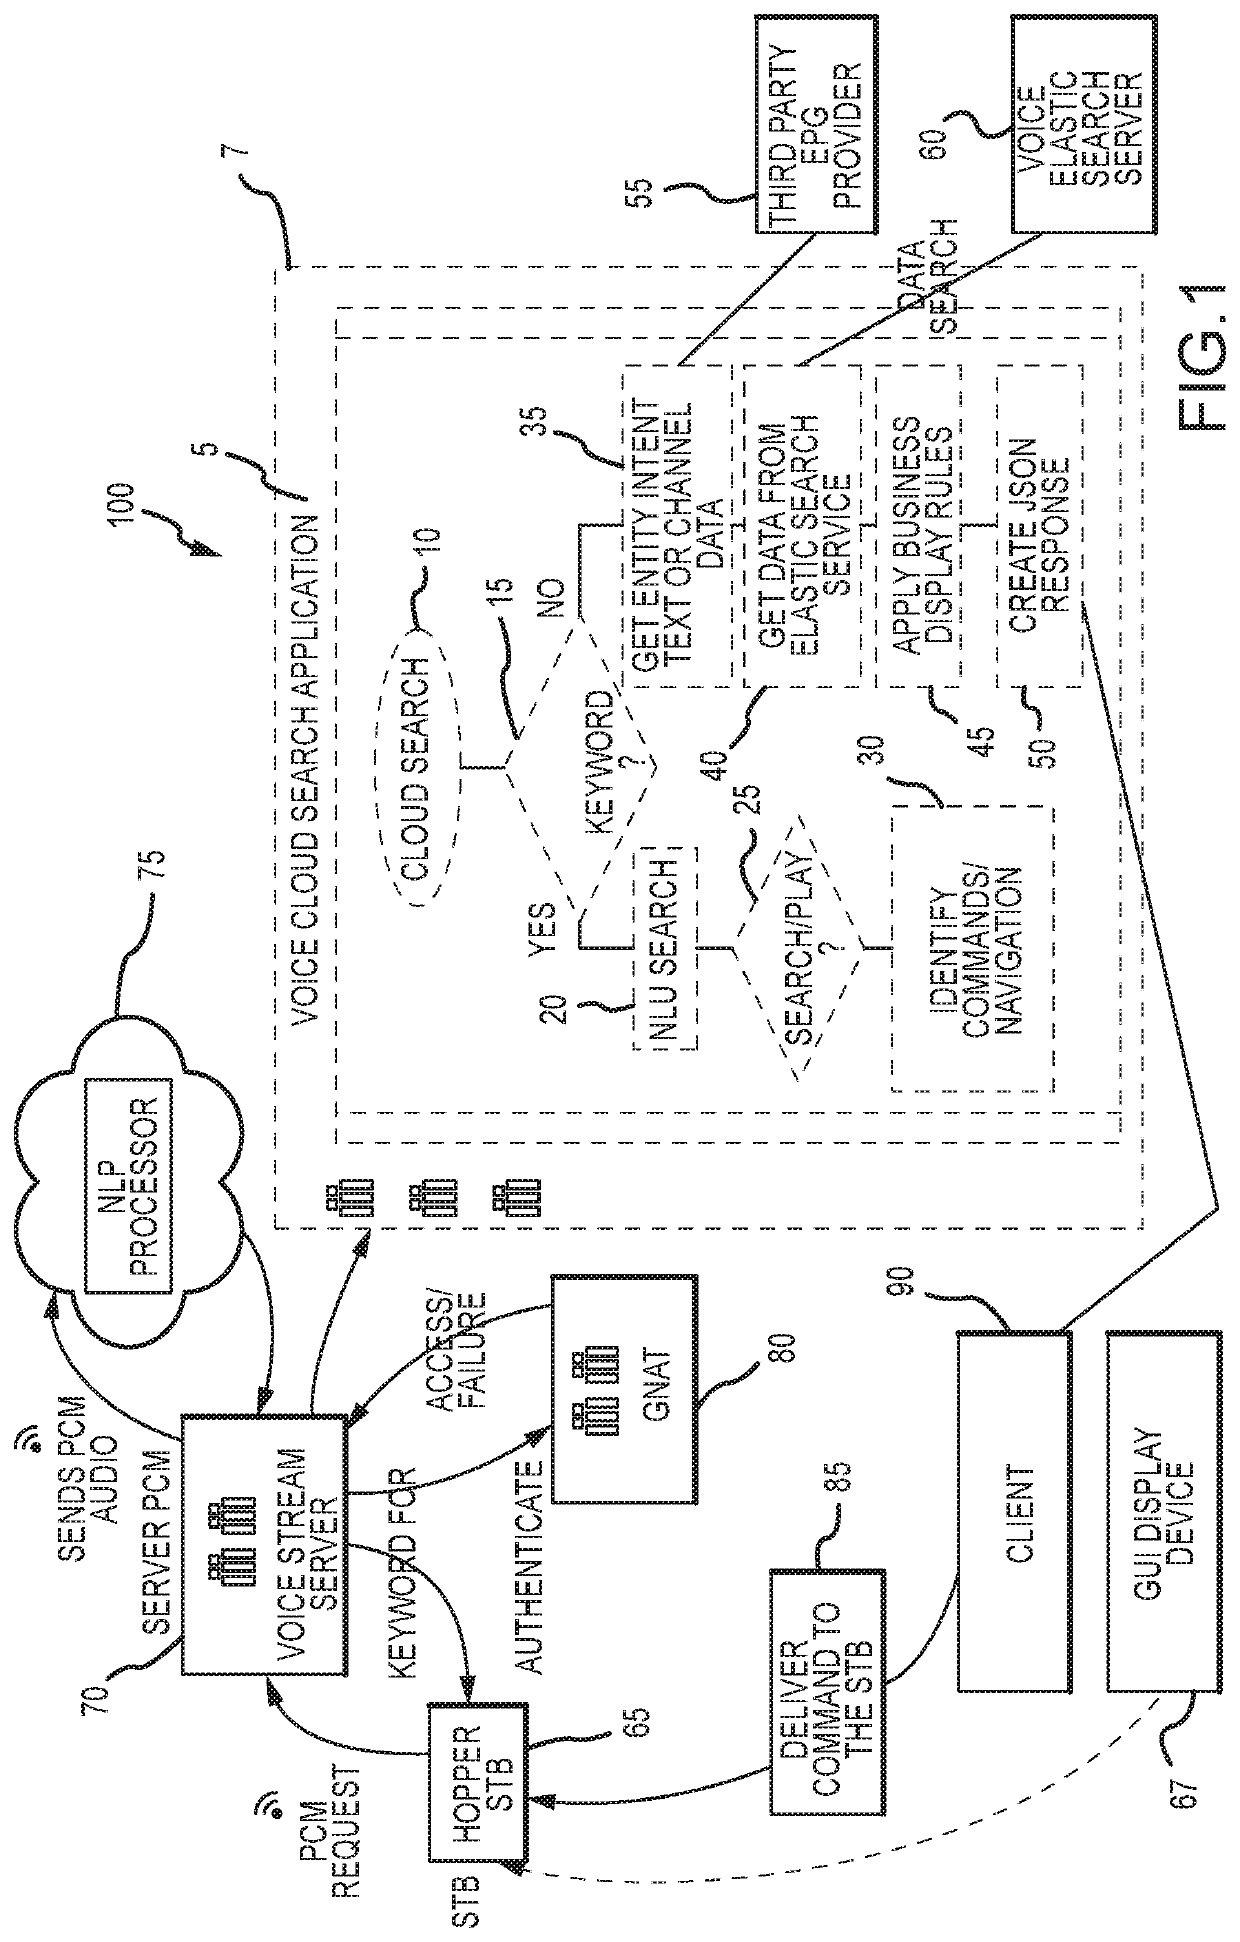 Methods and systems for implementing an elastic cloud based voice search using a third-party search provider